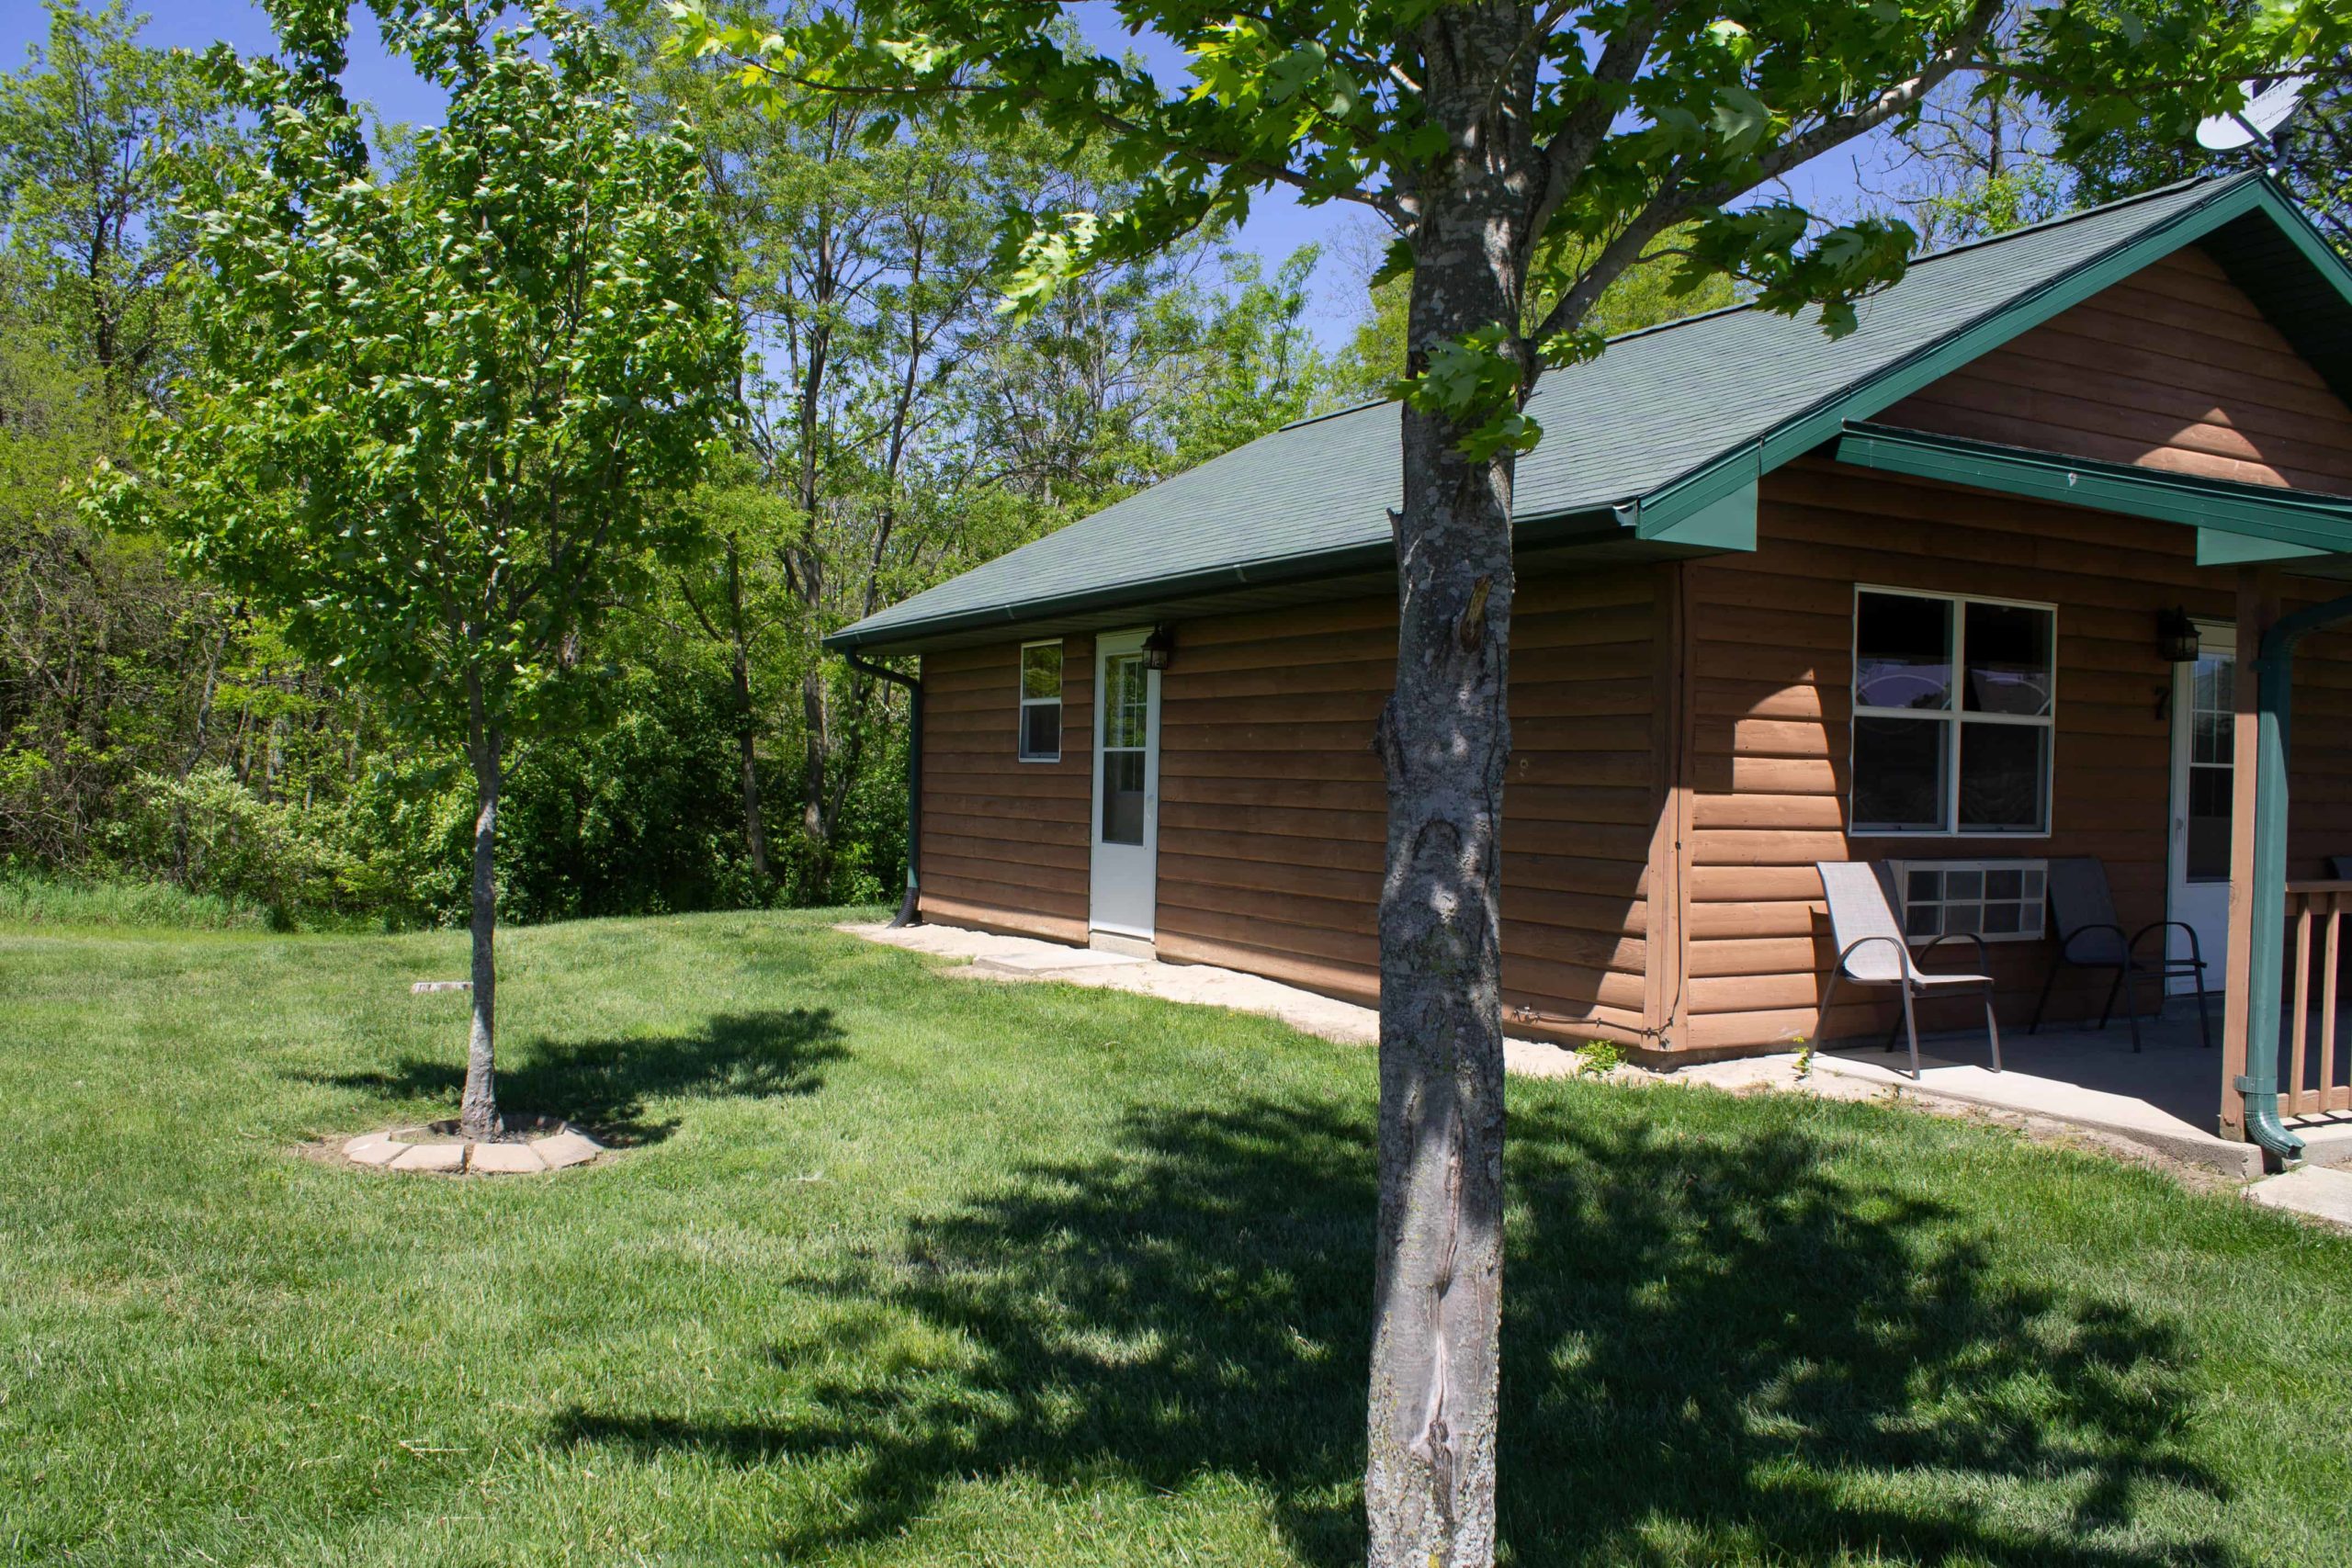 exterior view of one of the family-friendly, affordable vacation cabin rentals near shelbyville illinois